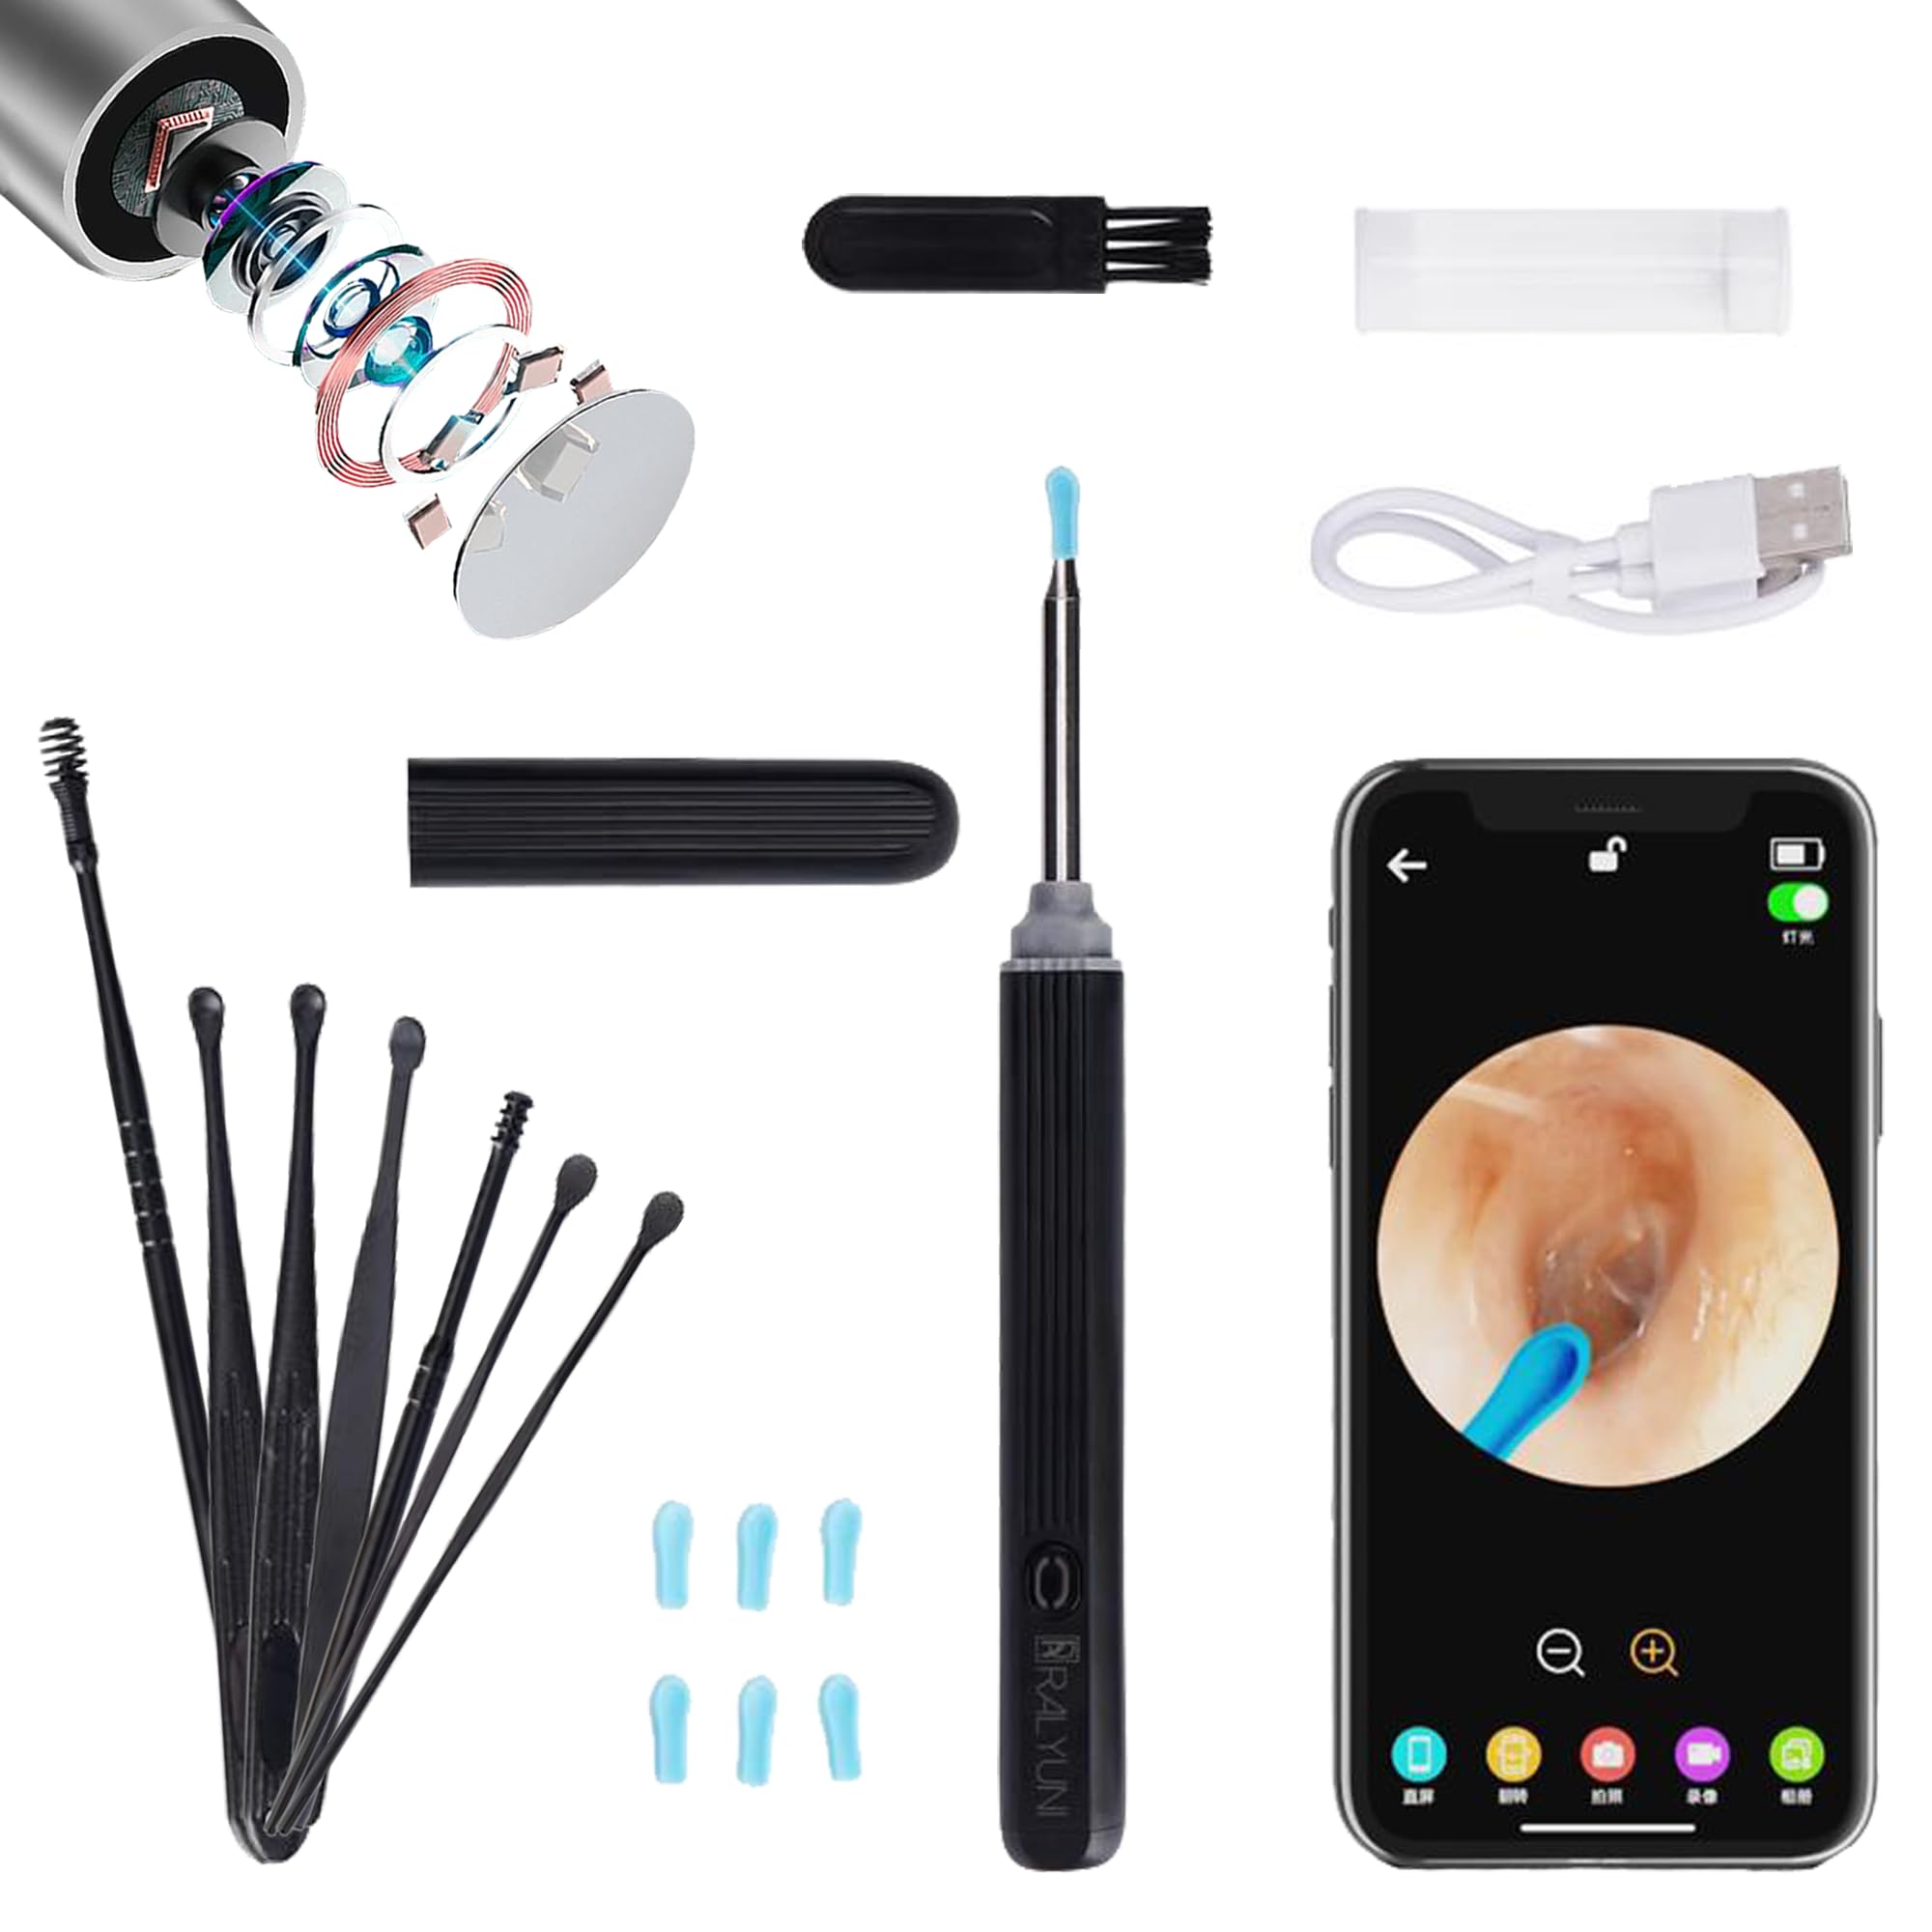 Ear Wax Removal Cleaner,Ear Endoscope with LED Lights for Ear Wax Removal Tool 1080P HD Camera Otoscope Compatible iPhone,iPad & Android,Ear Wax Removal Cleaner with Camera